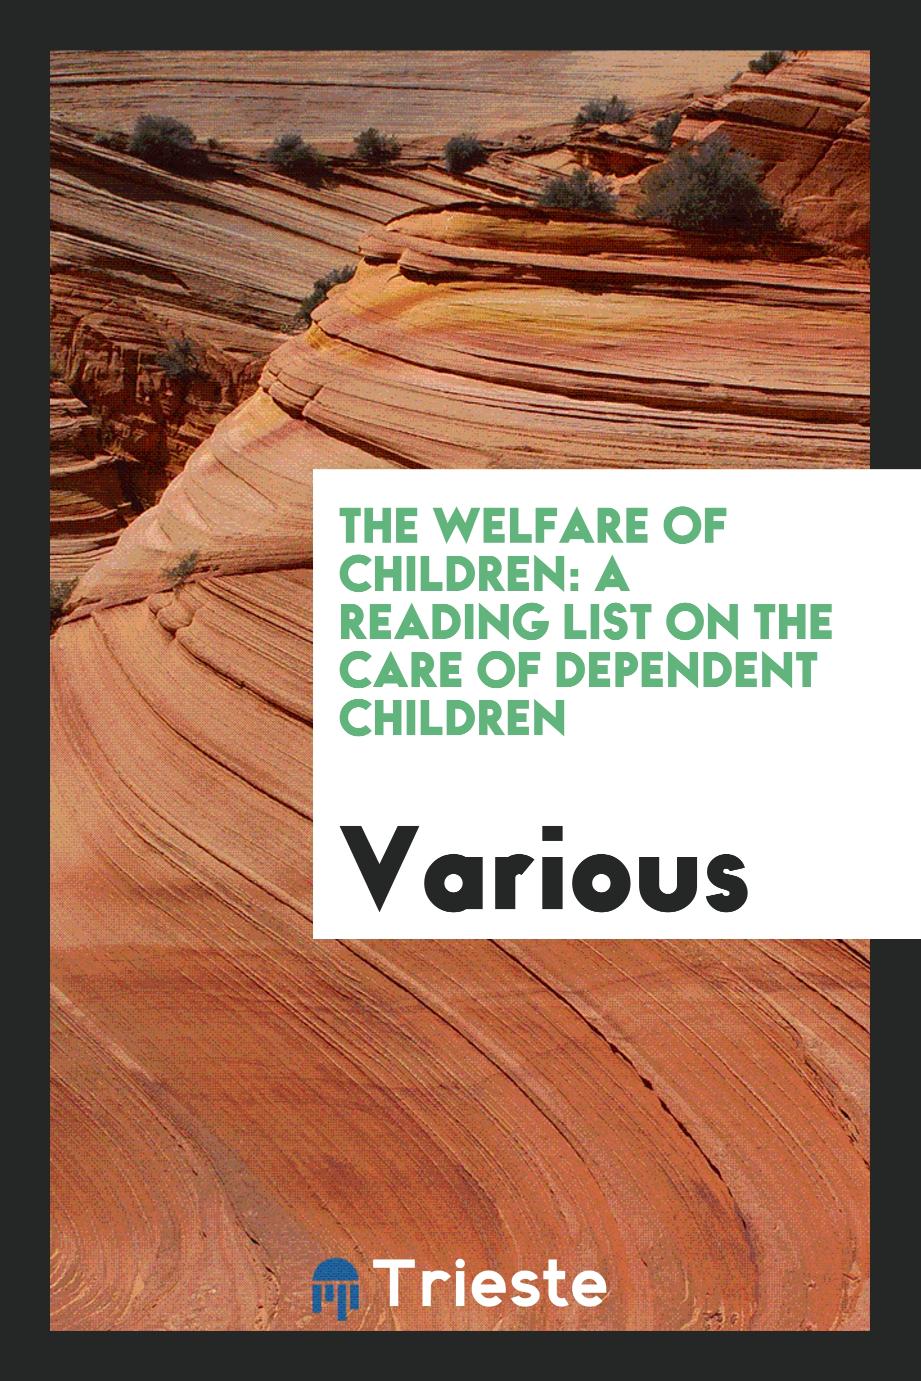 The Welfare of Children: A Reading List on the Care of Dependent Children